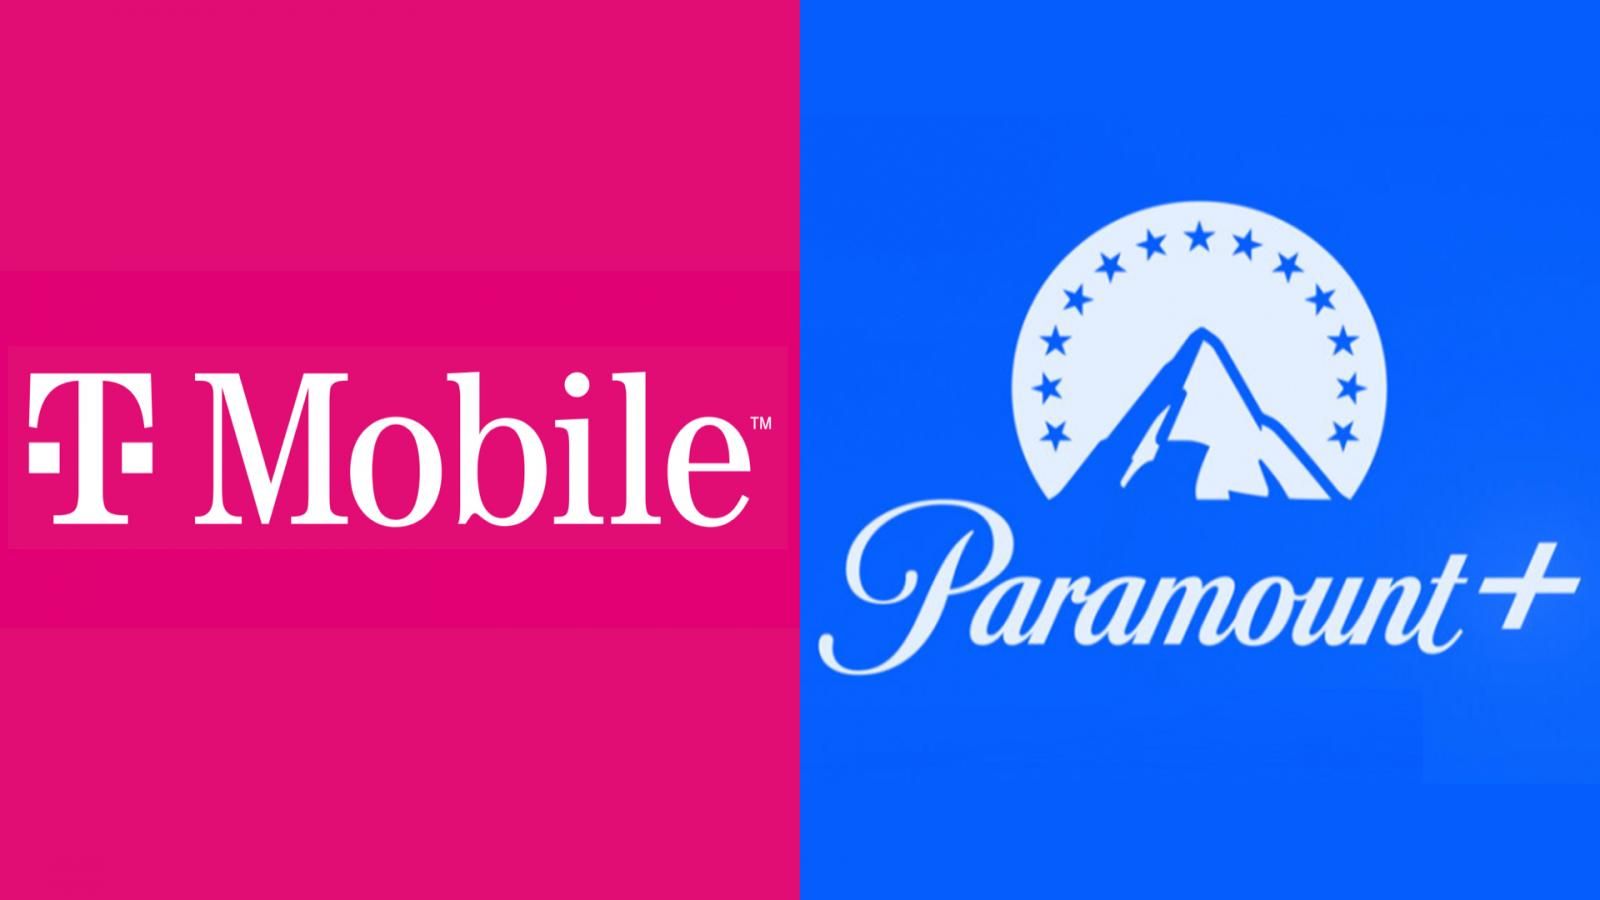 T-Mobile is giving away a free year of Paramount+